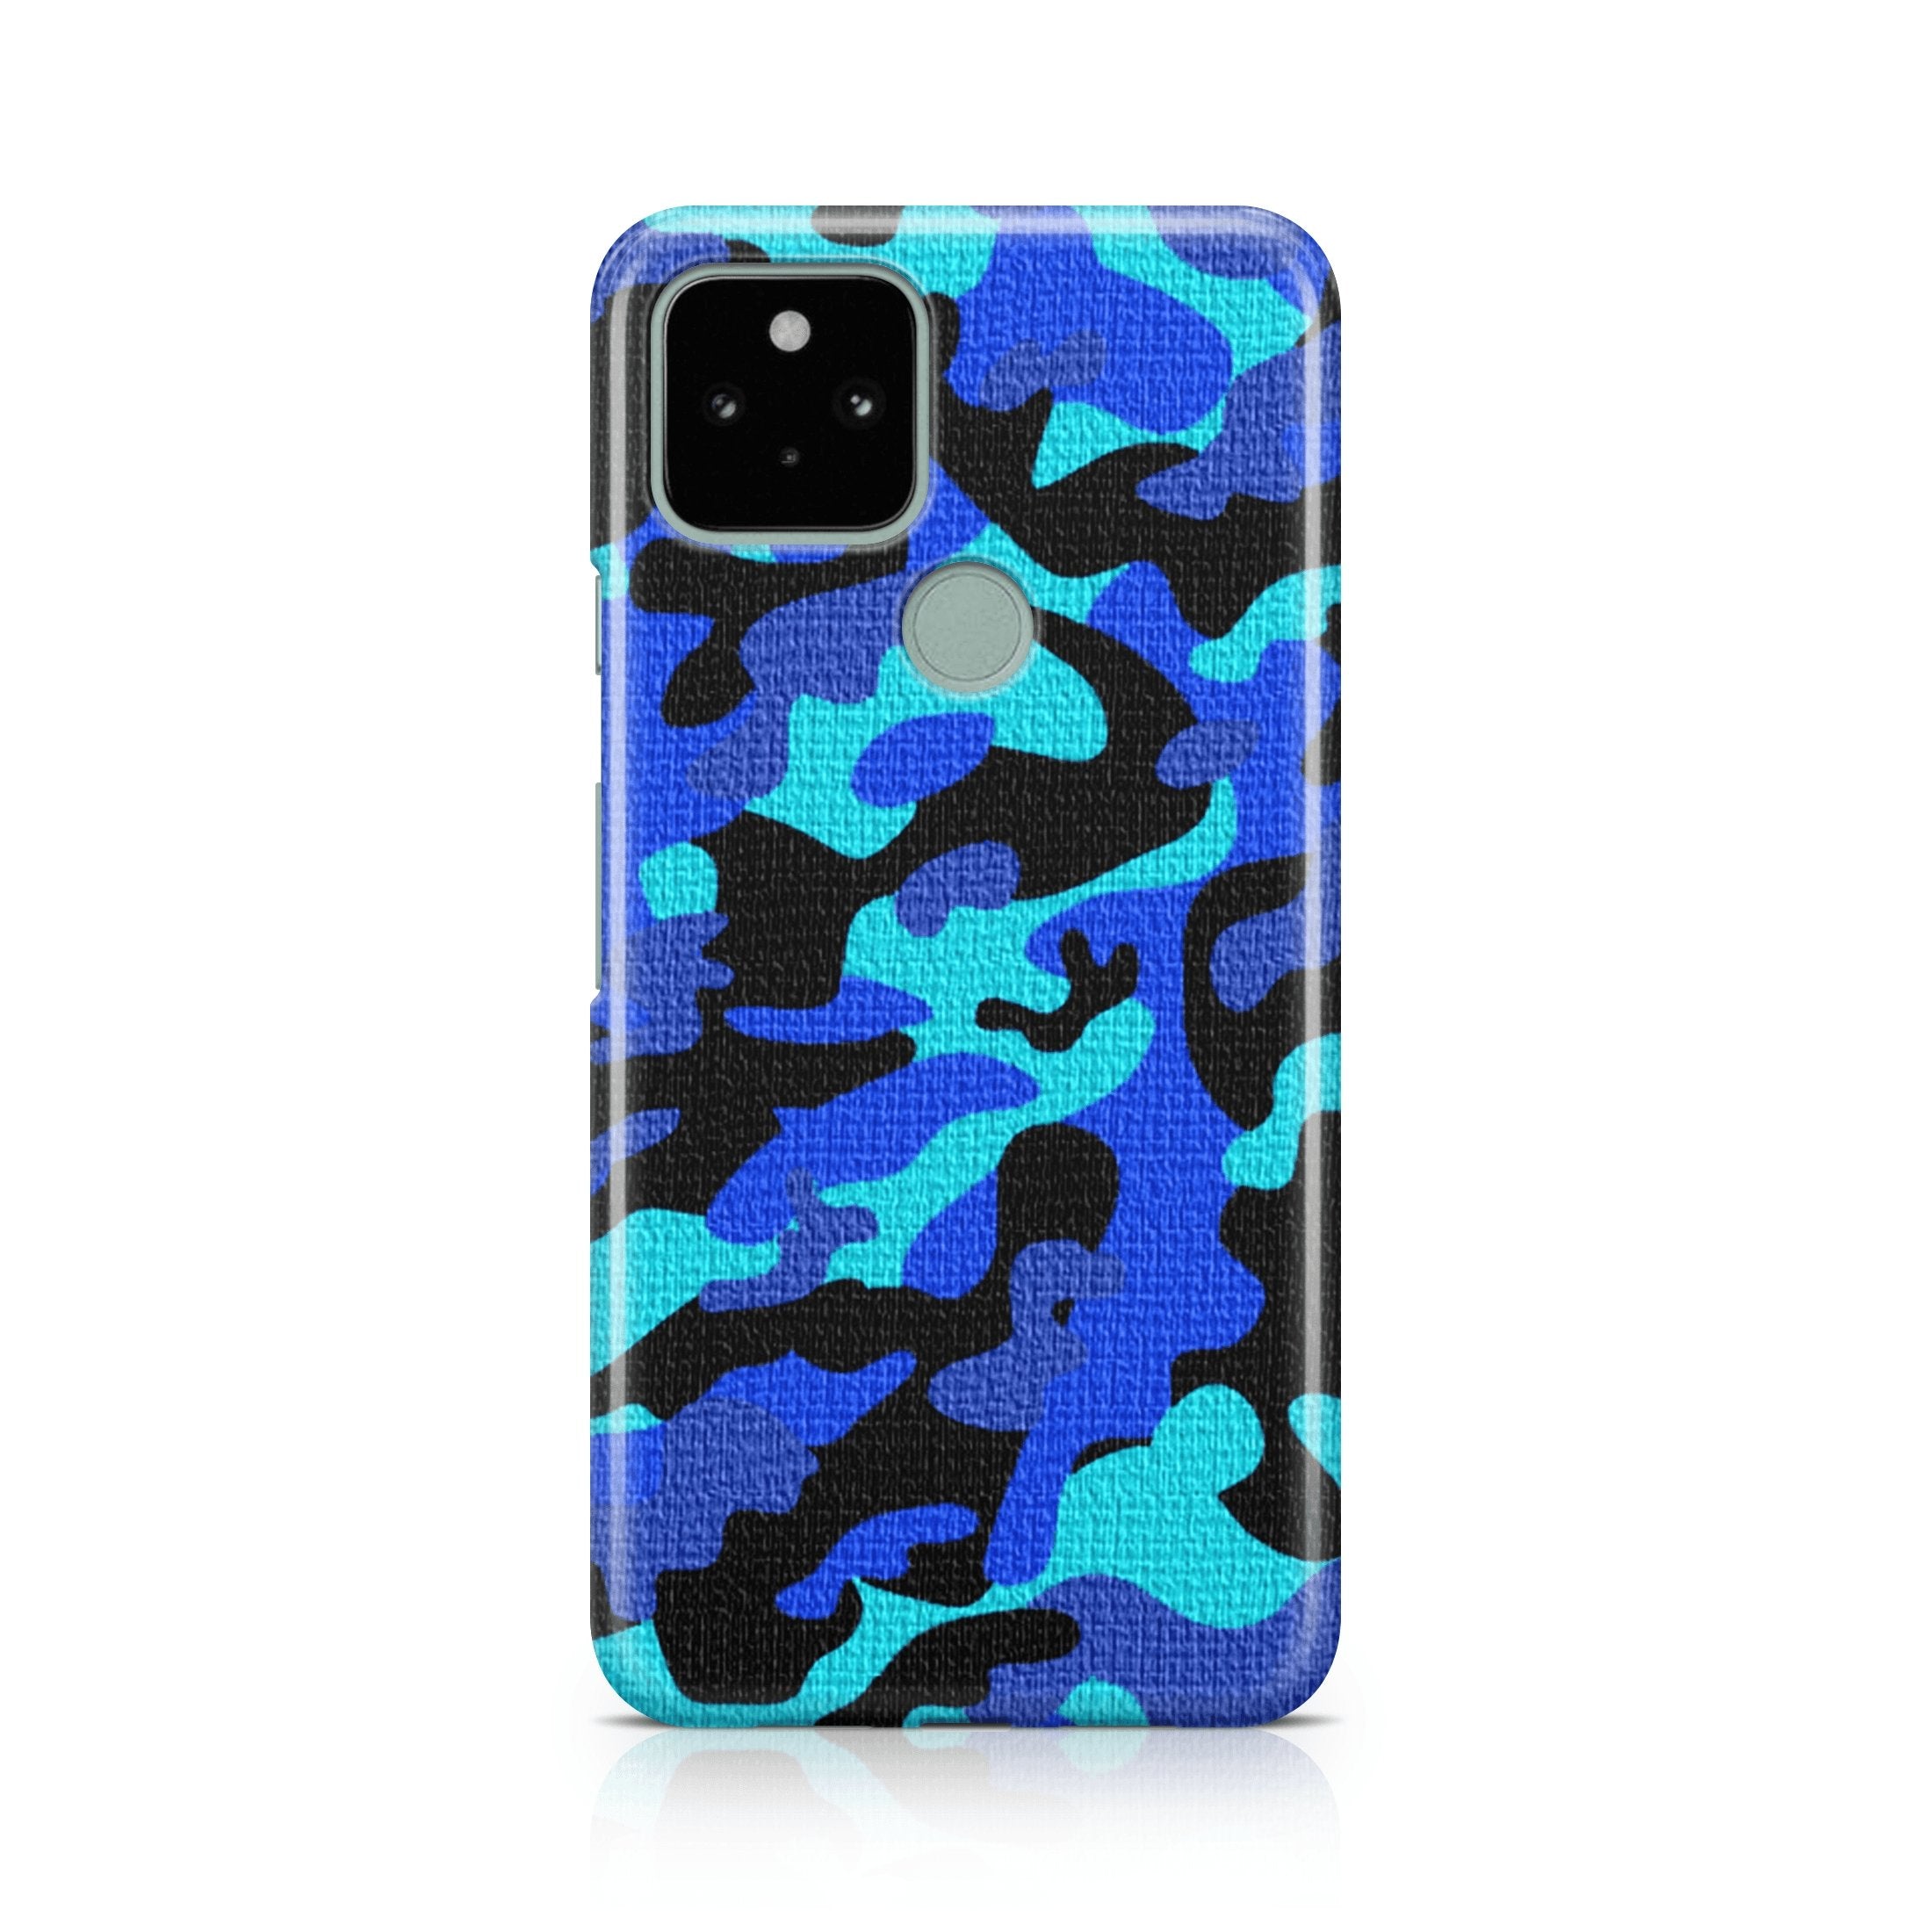 Blue Camo - Google phone case designs by CaseSwagger